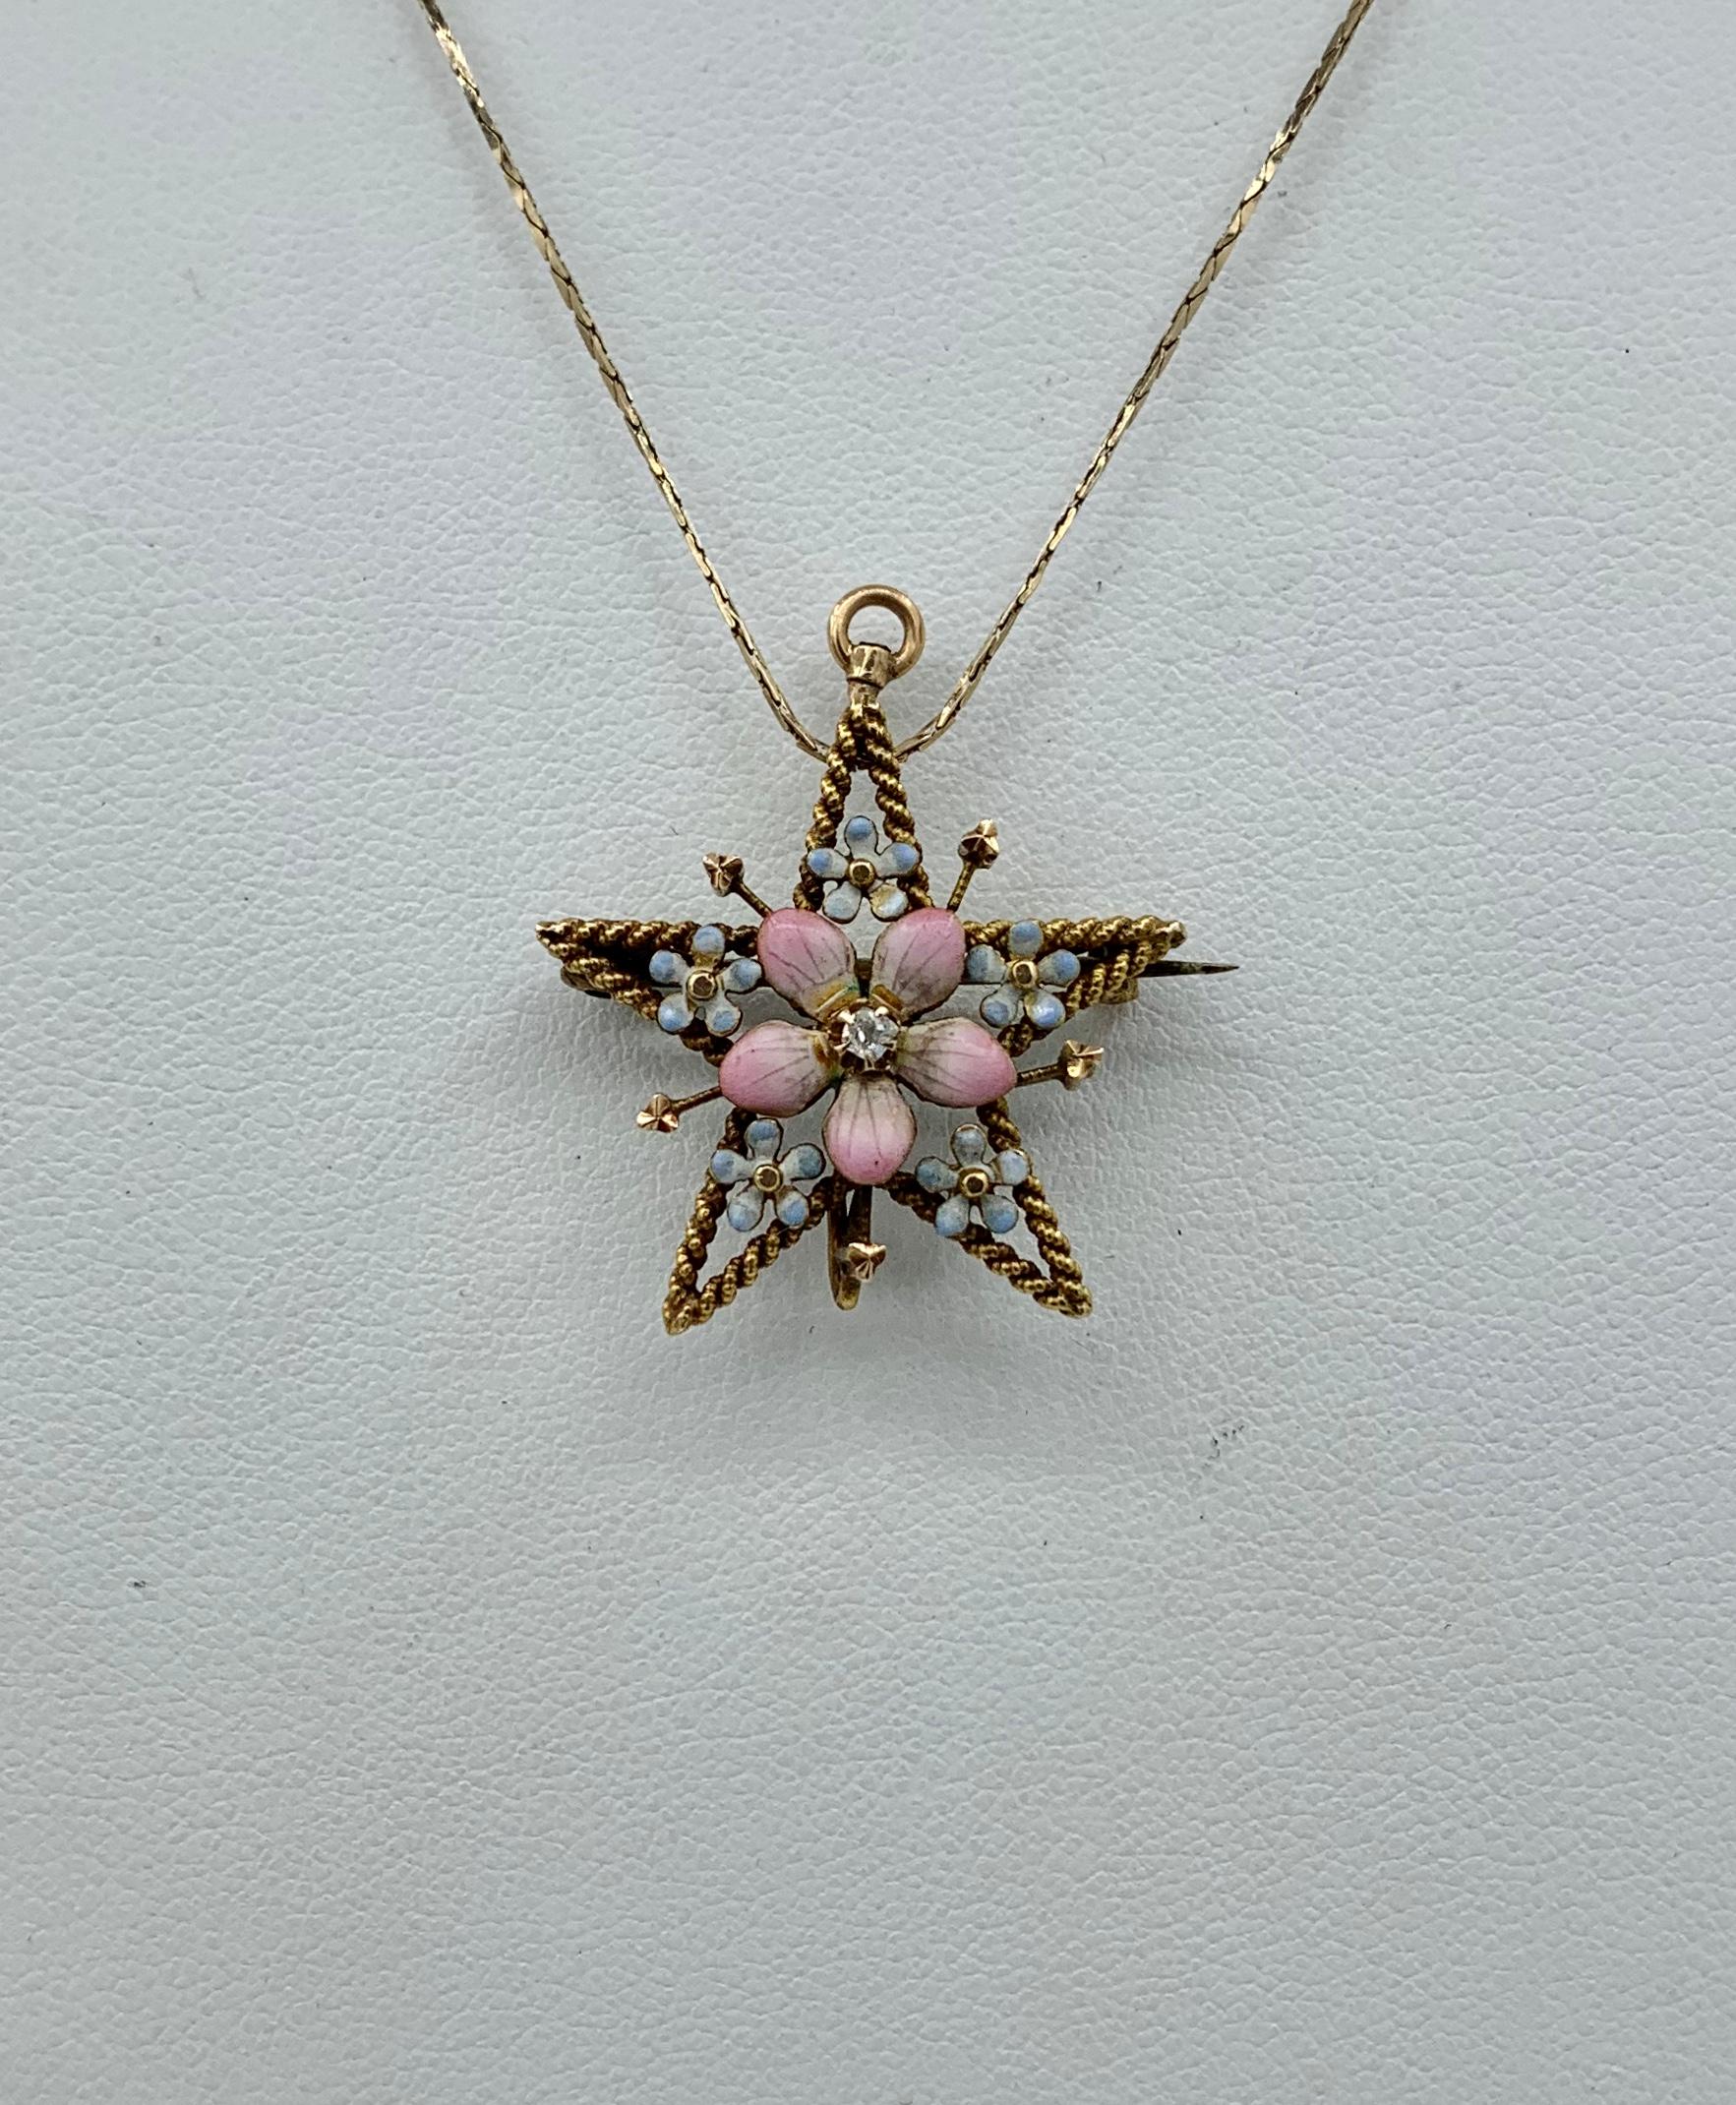 THIS IS A GORGEOUS VICTORIAN - ART NOUVEAU PENDANT OR BROOCH IN THE FORM OF A STAR ADORNED THROUGHOUT WITH PINK AND BLUE ENAMEL FORGET-ME-NOT, OR PANSY, FLOWERS WITH AN OLD MINE CUT DIAMOND IN THE CENTER, AND IN 14 KARAT GOLD.  THIS IS ONE OF THE